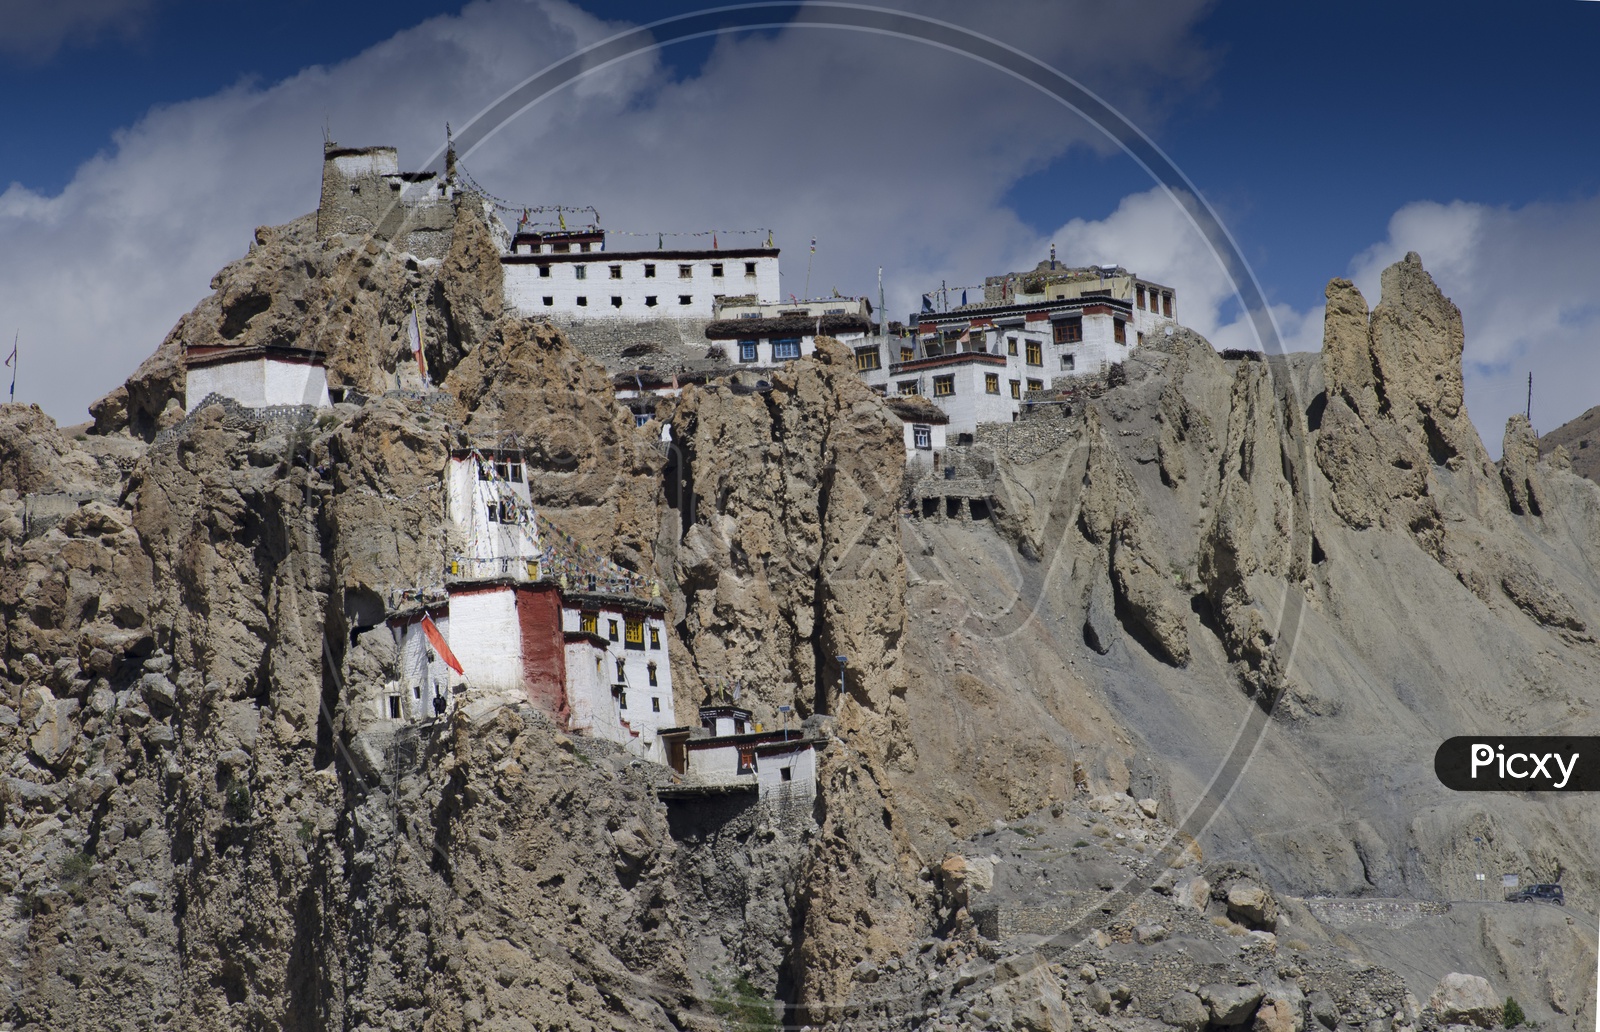 Dhankar Monastery from the bottom of the mountain